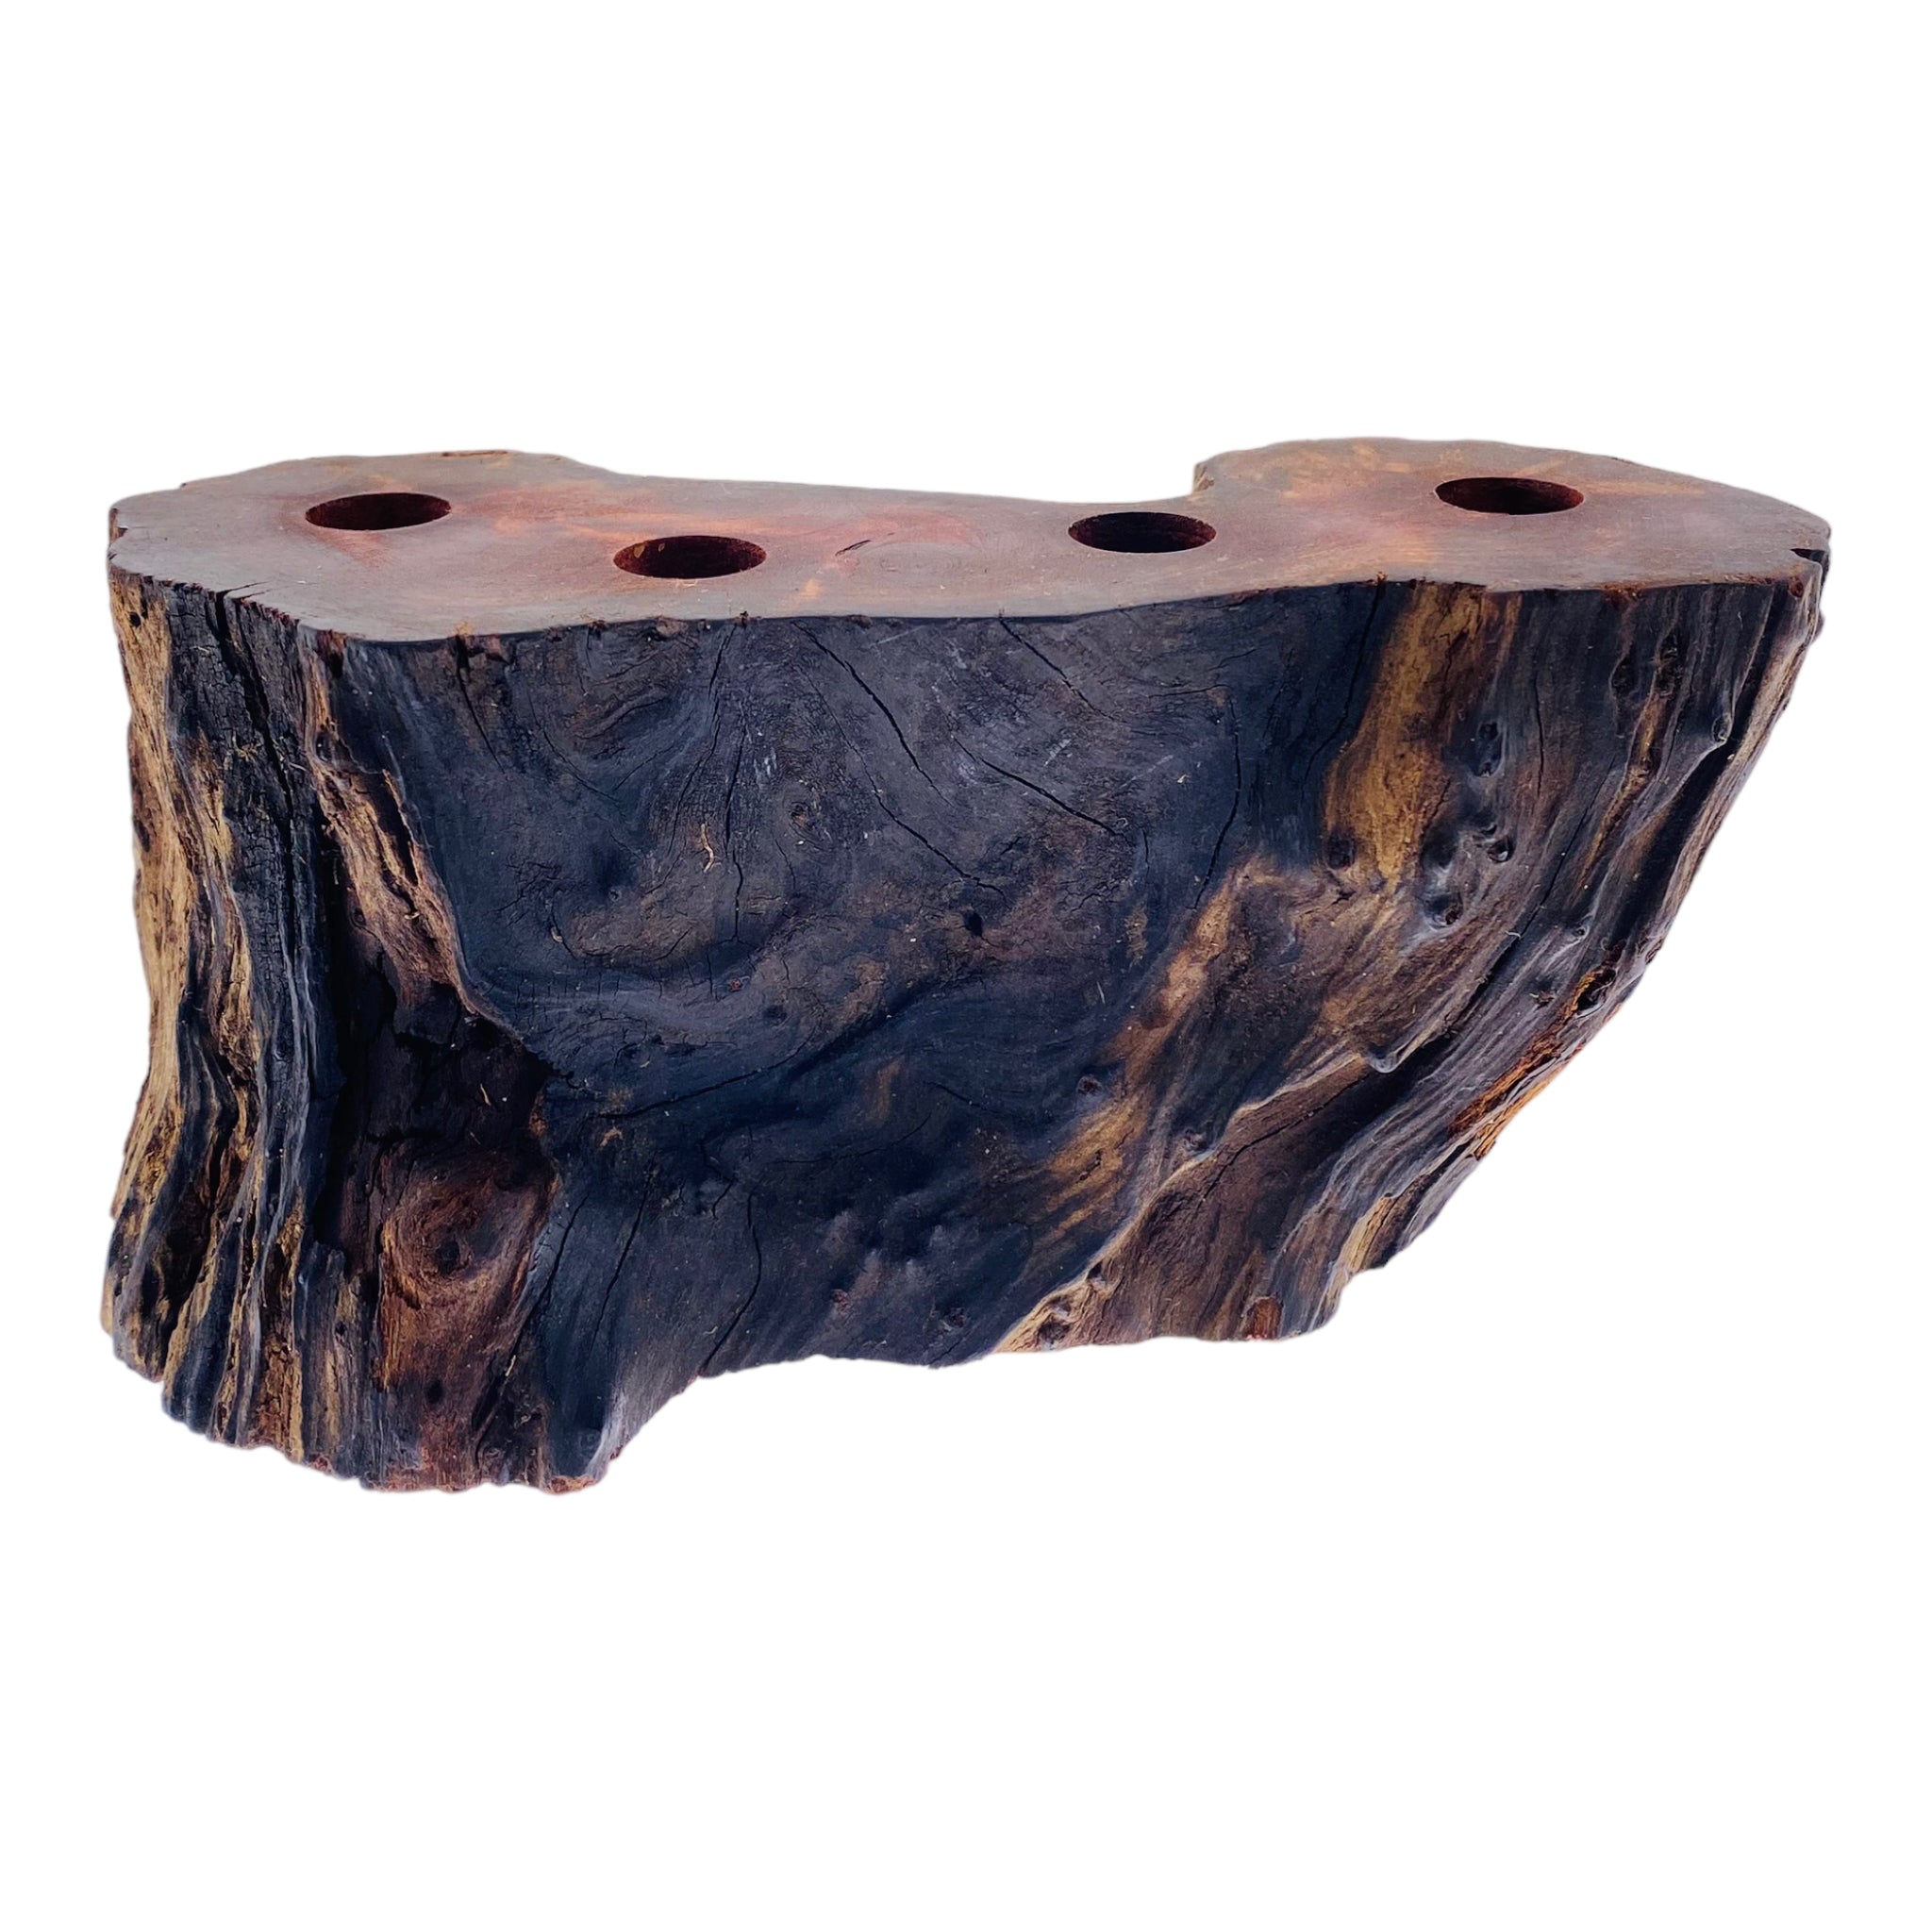 4 Hole Wood Display Stand Holder For 14mm Bong Bowl Pieces Or Quartz Bangers - Red Wood Burl With Live Edge